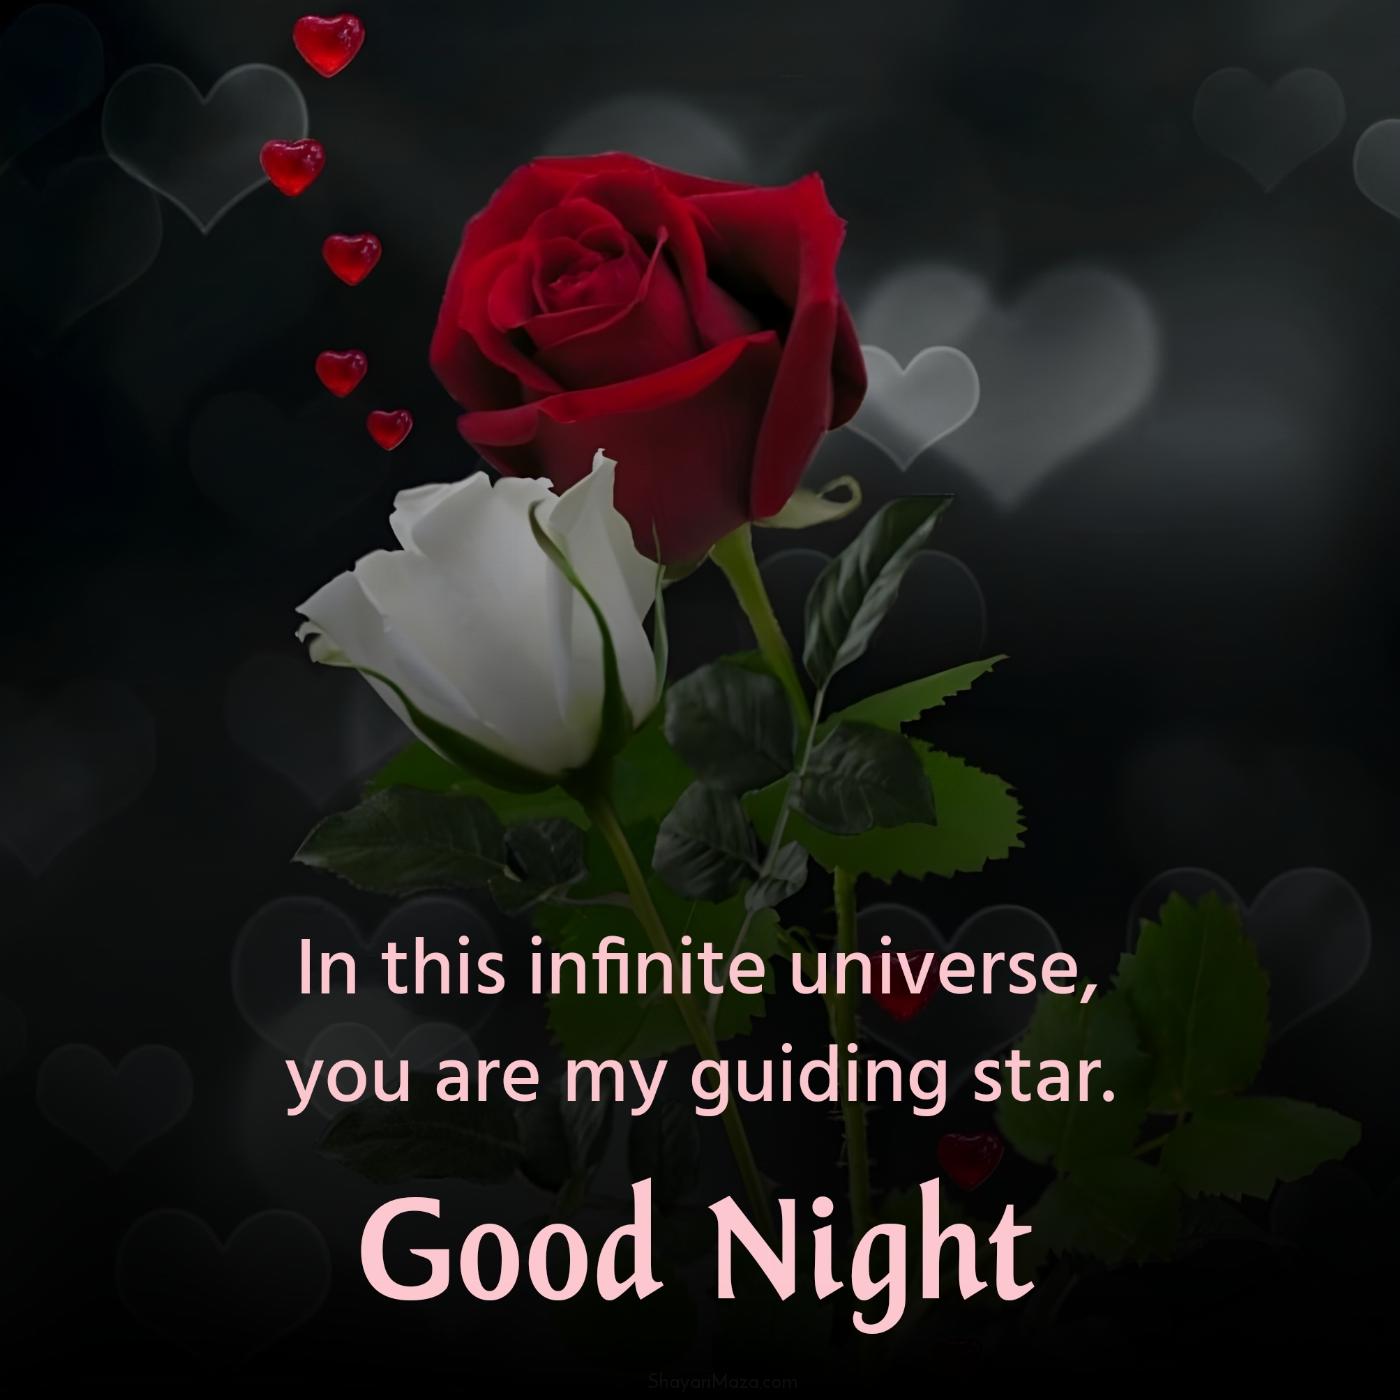 In this infinite universe you are my guiding star